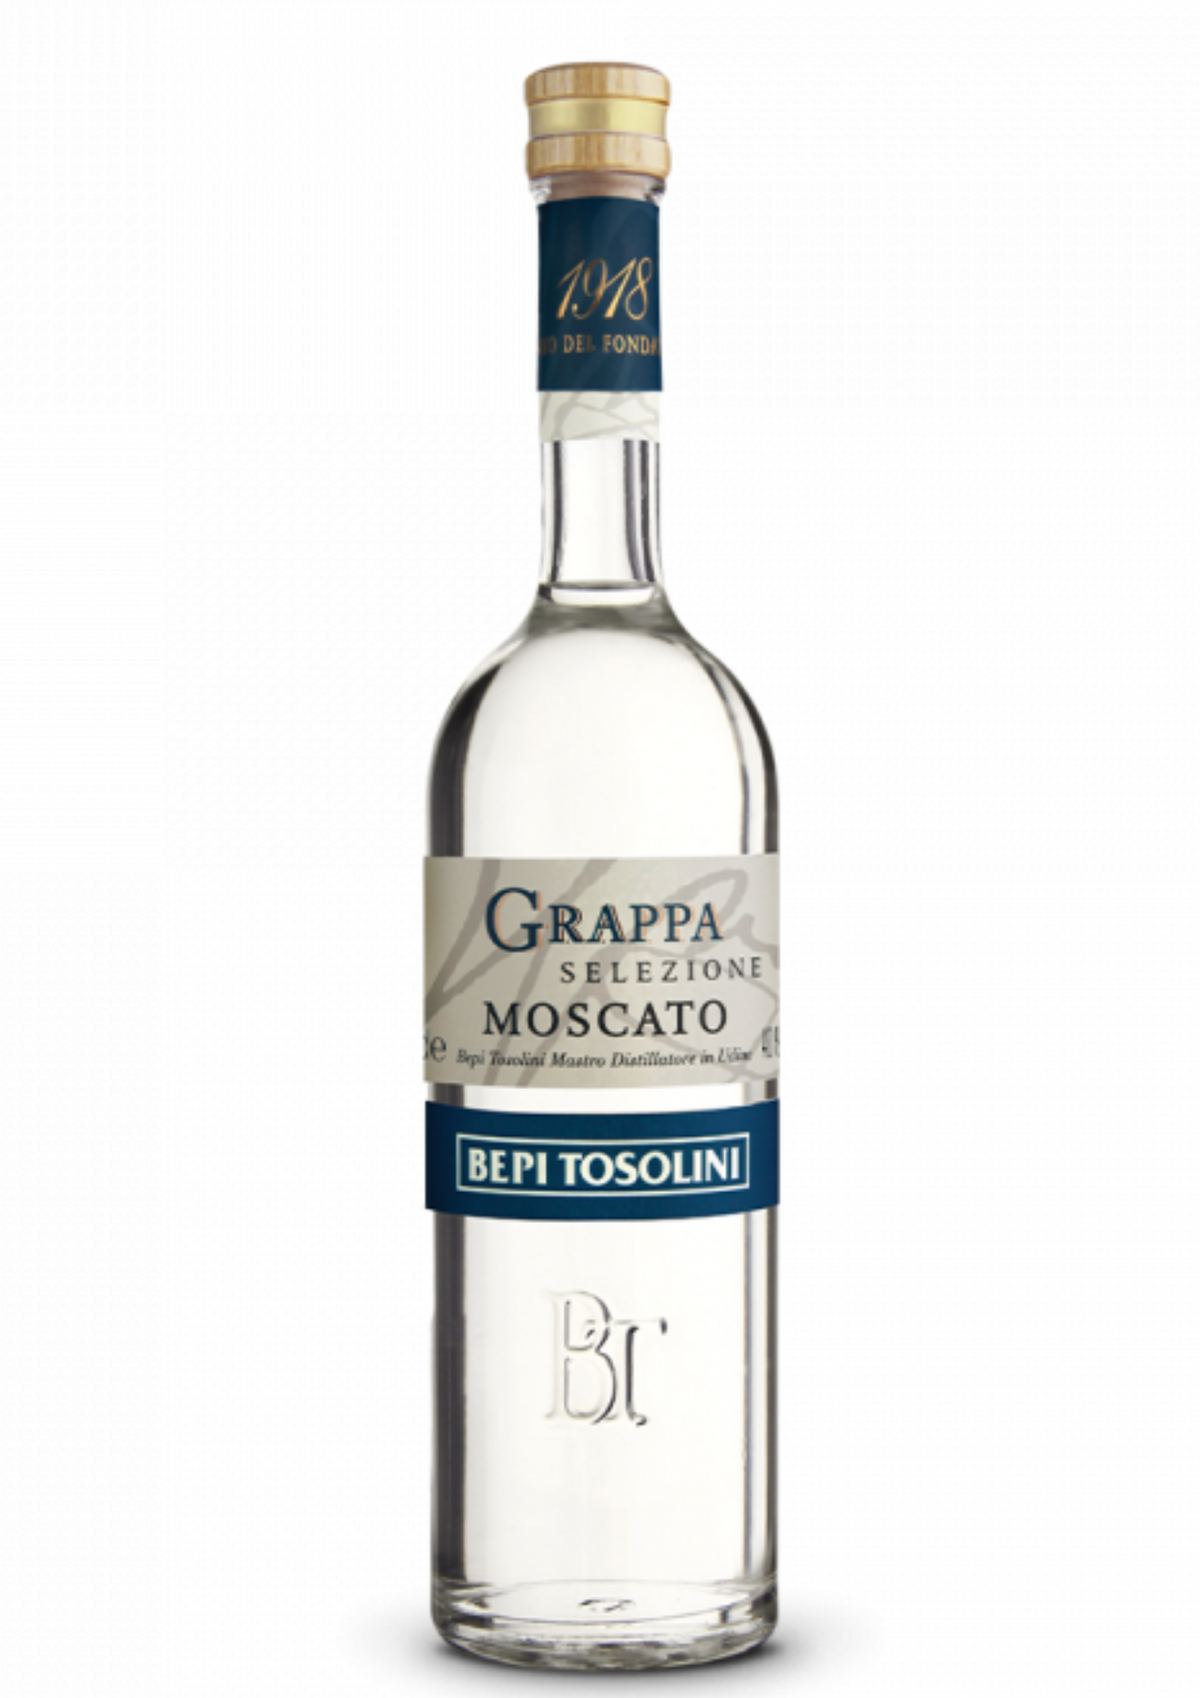 Bottle of Bepi Tosolini Grappa Moscato - The Spirits Room